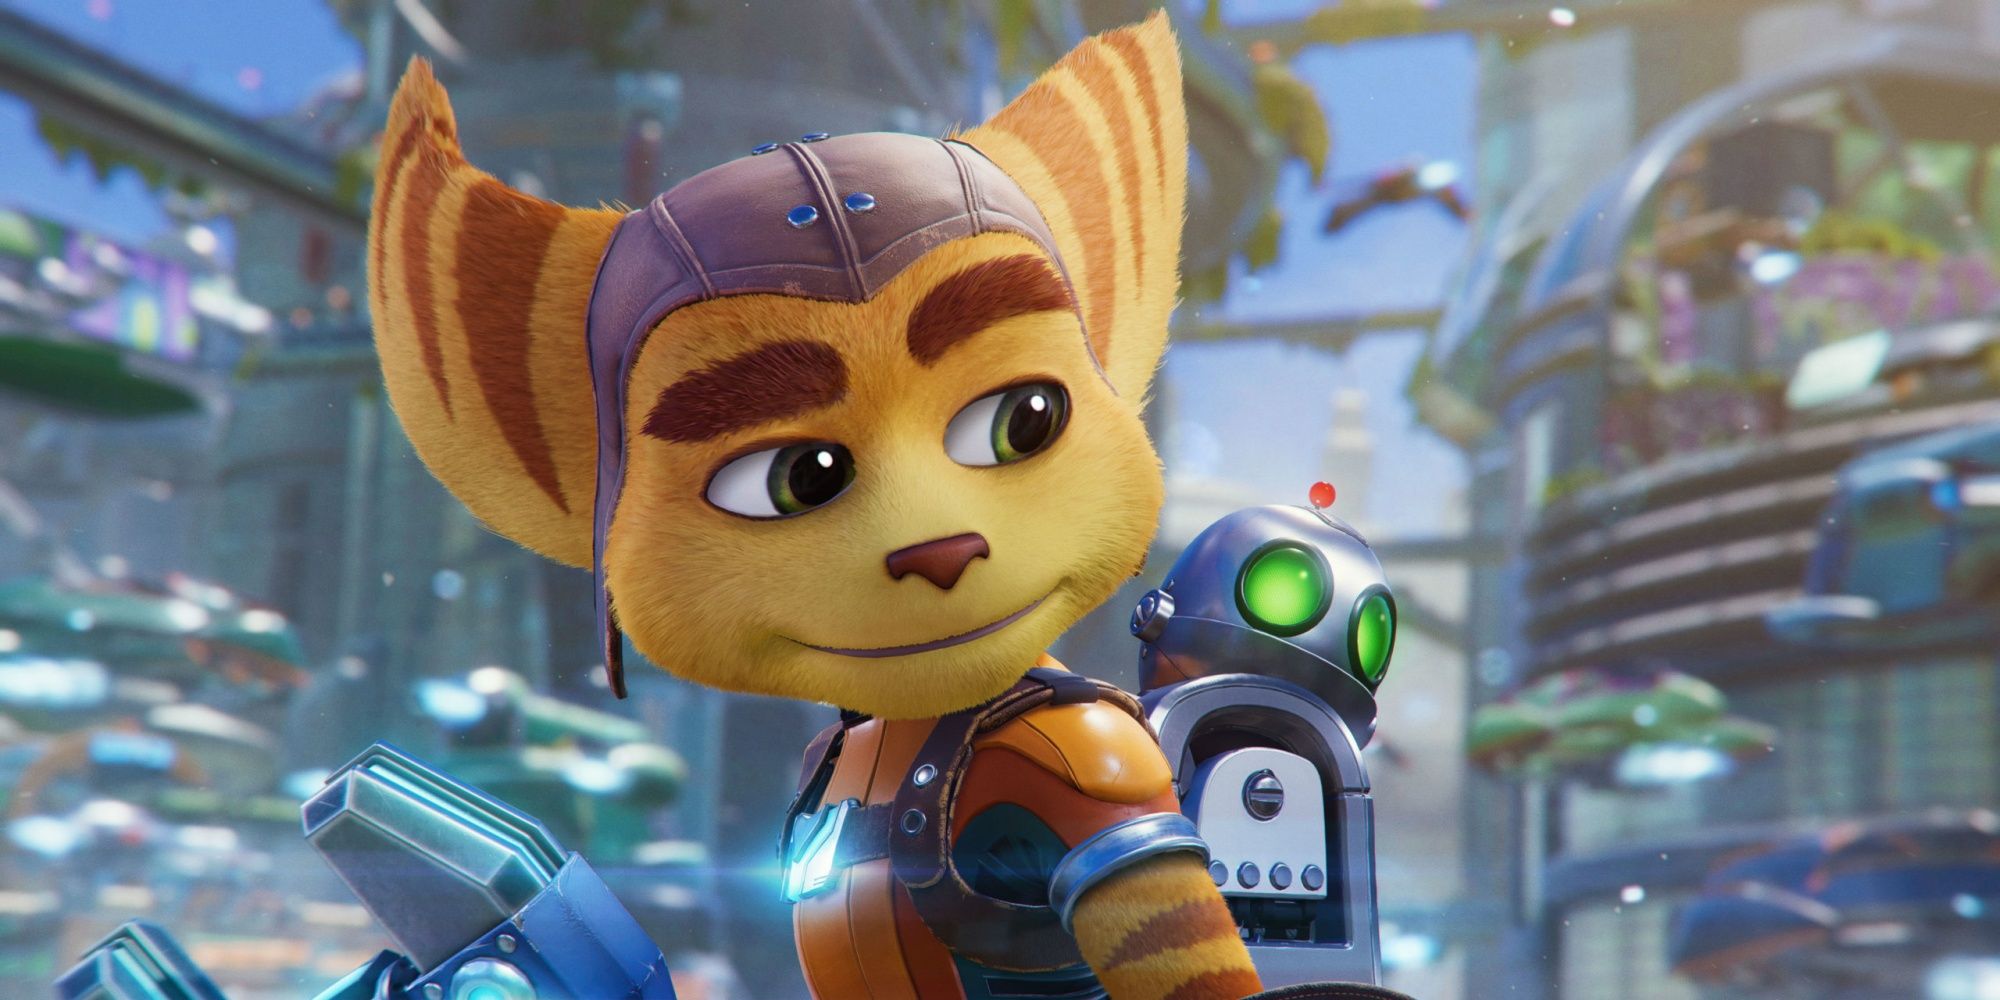 Ratchet and Clank in Ratchet and Clank: Rift Apart